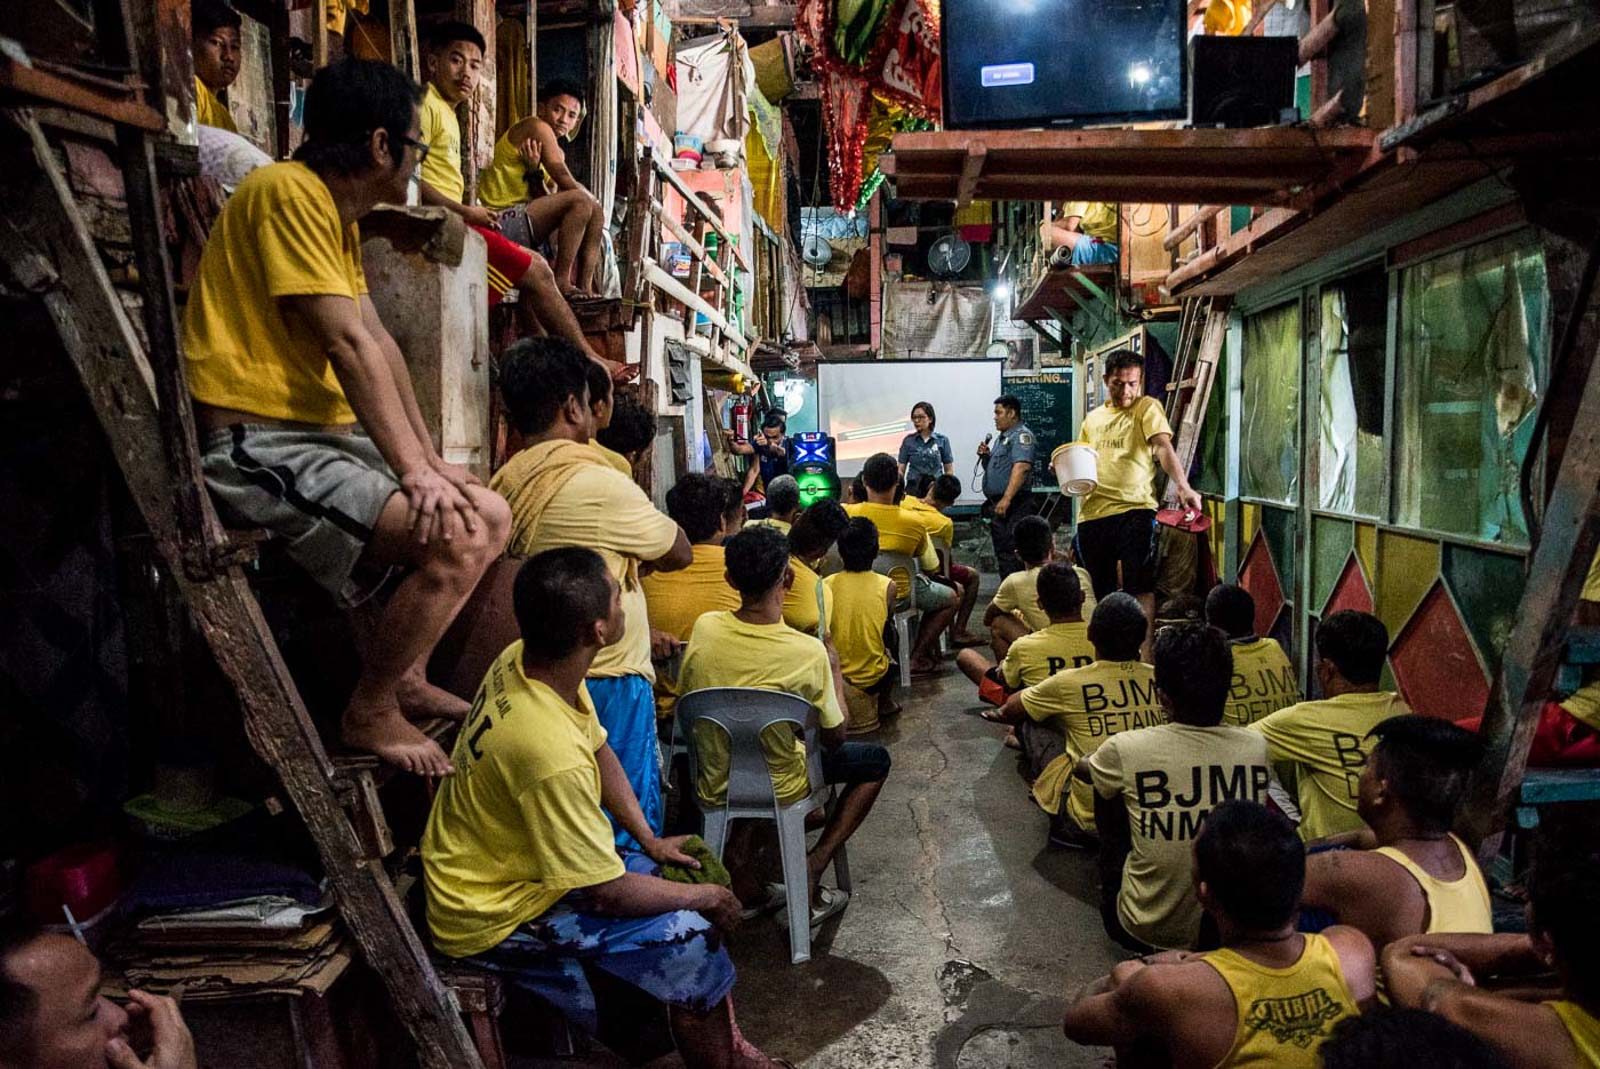 KAPATID calls for mass testing of prisoners in congested facilities